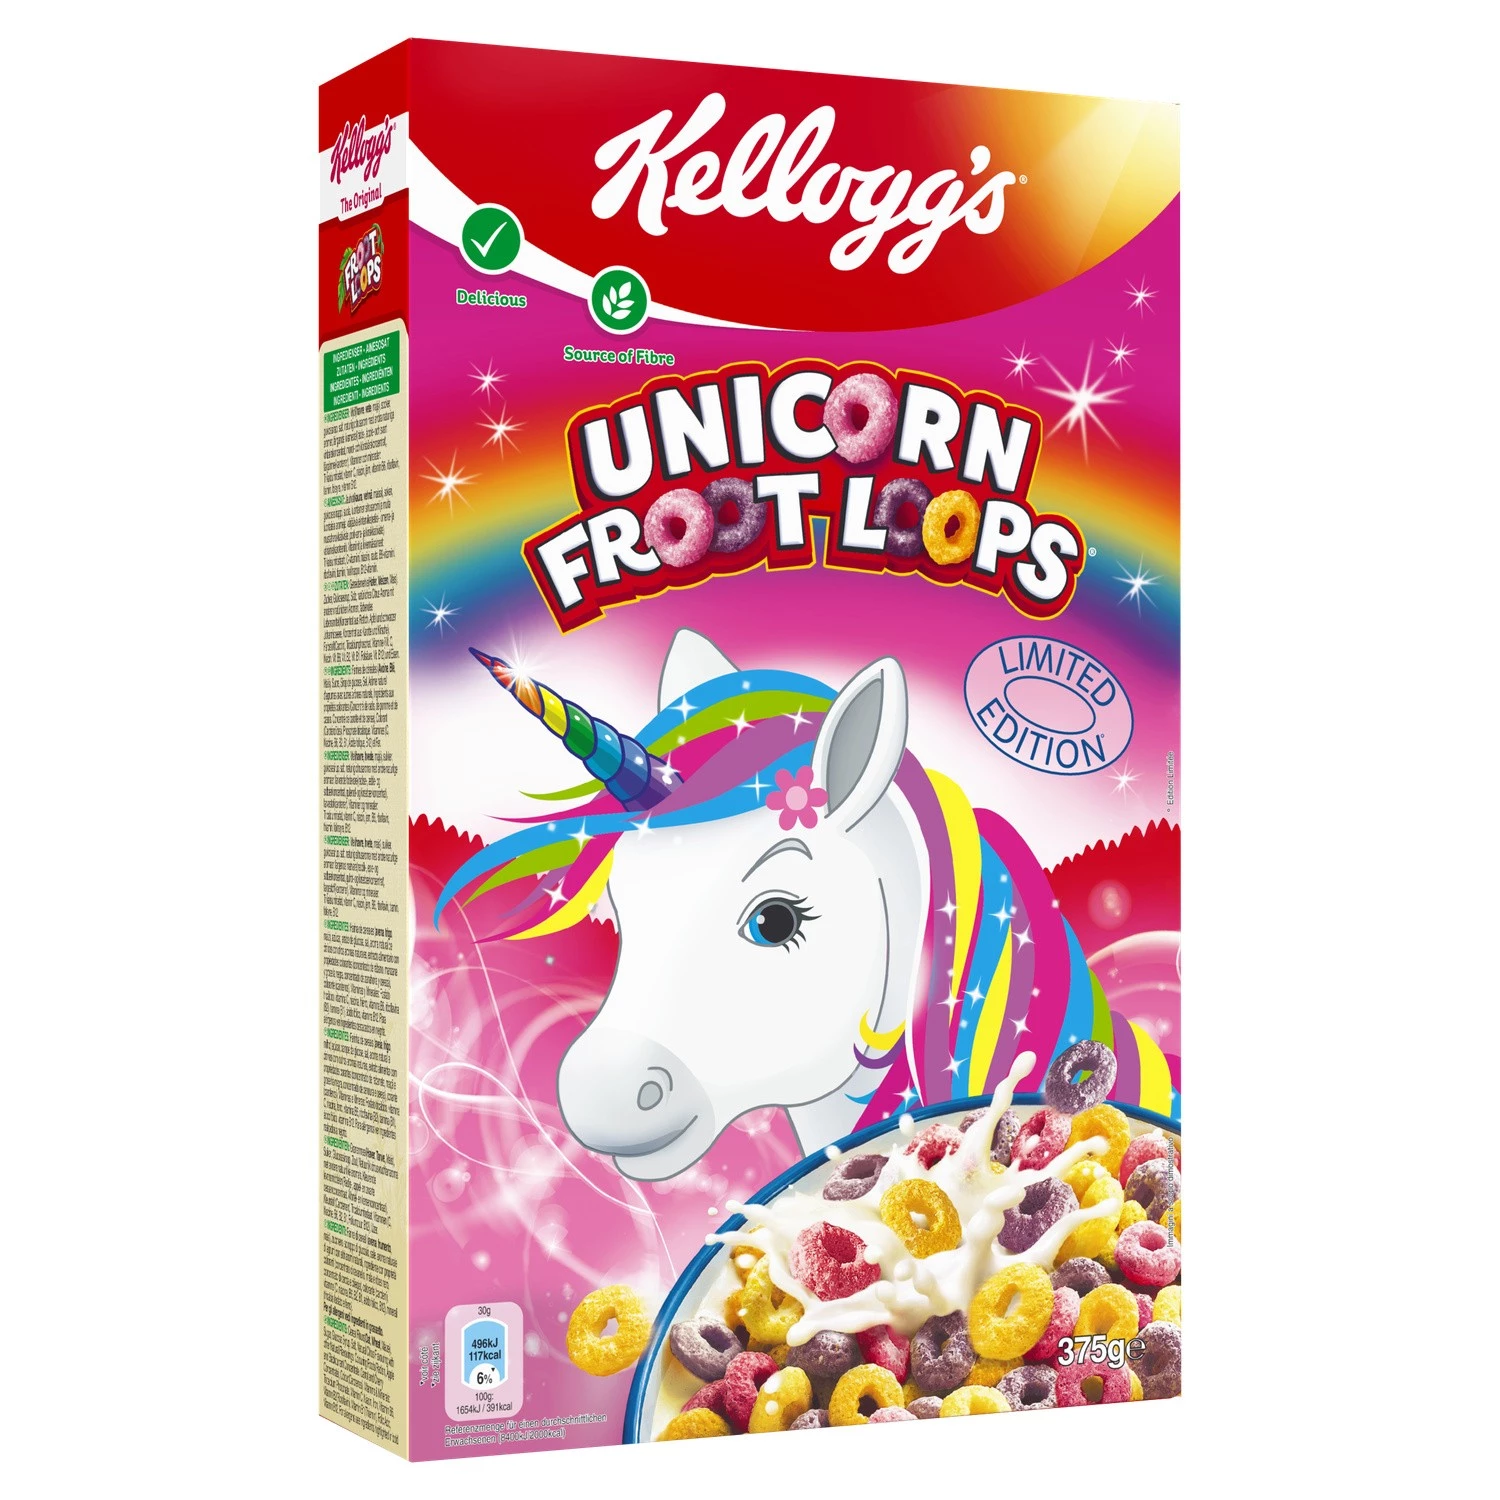 Cereal unicorn froot loops 375g - KELLOGG'S